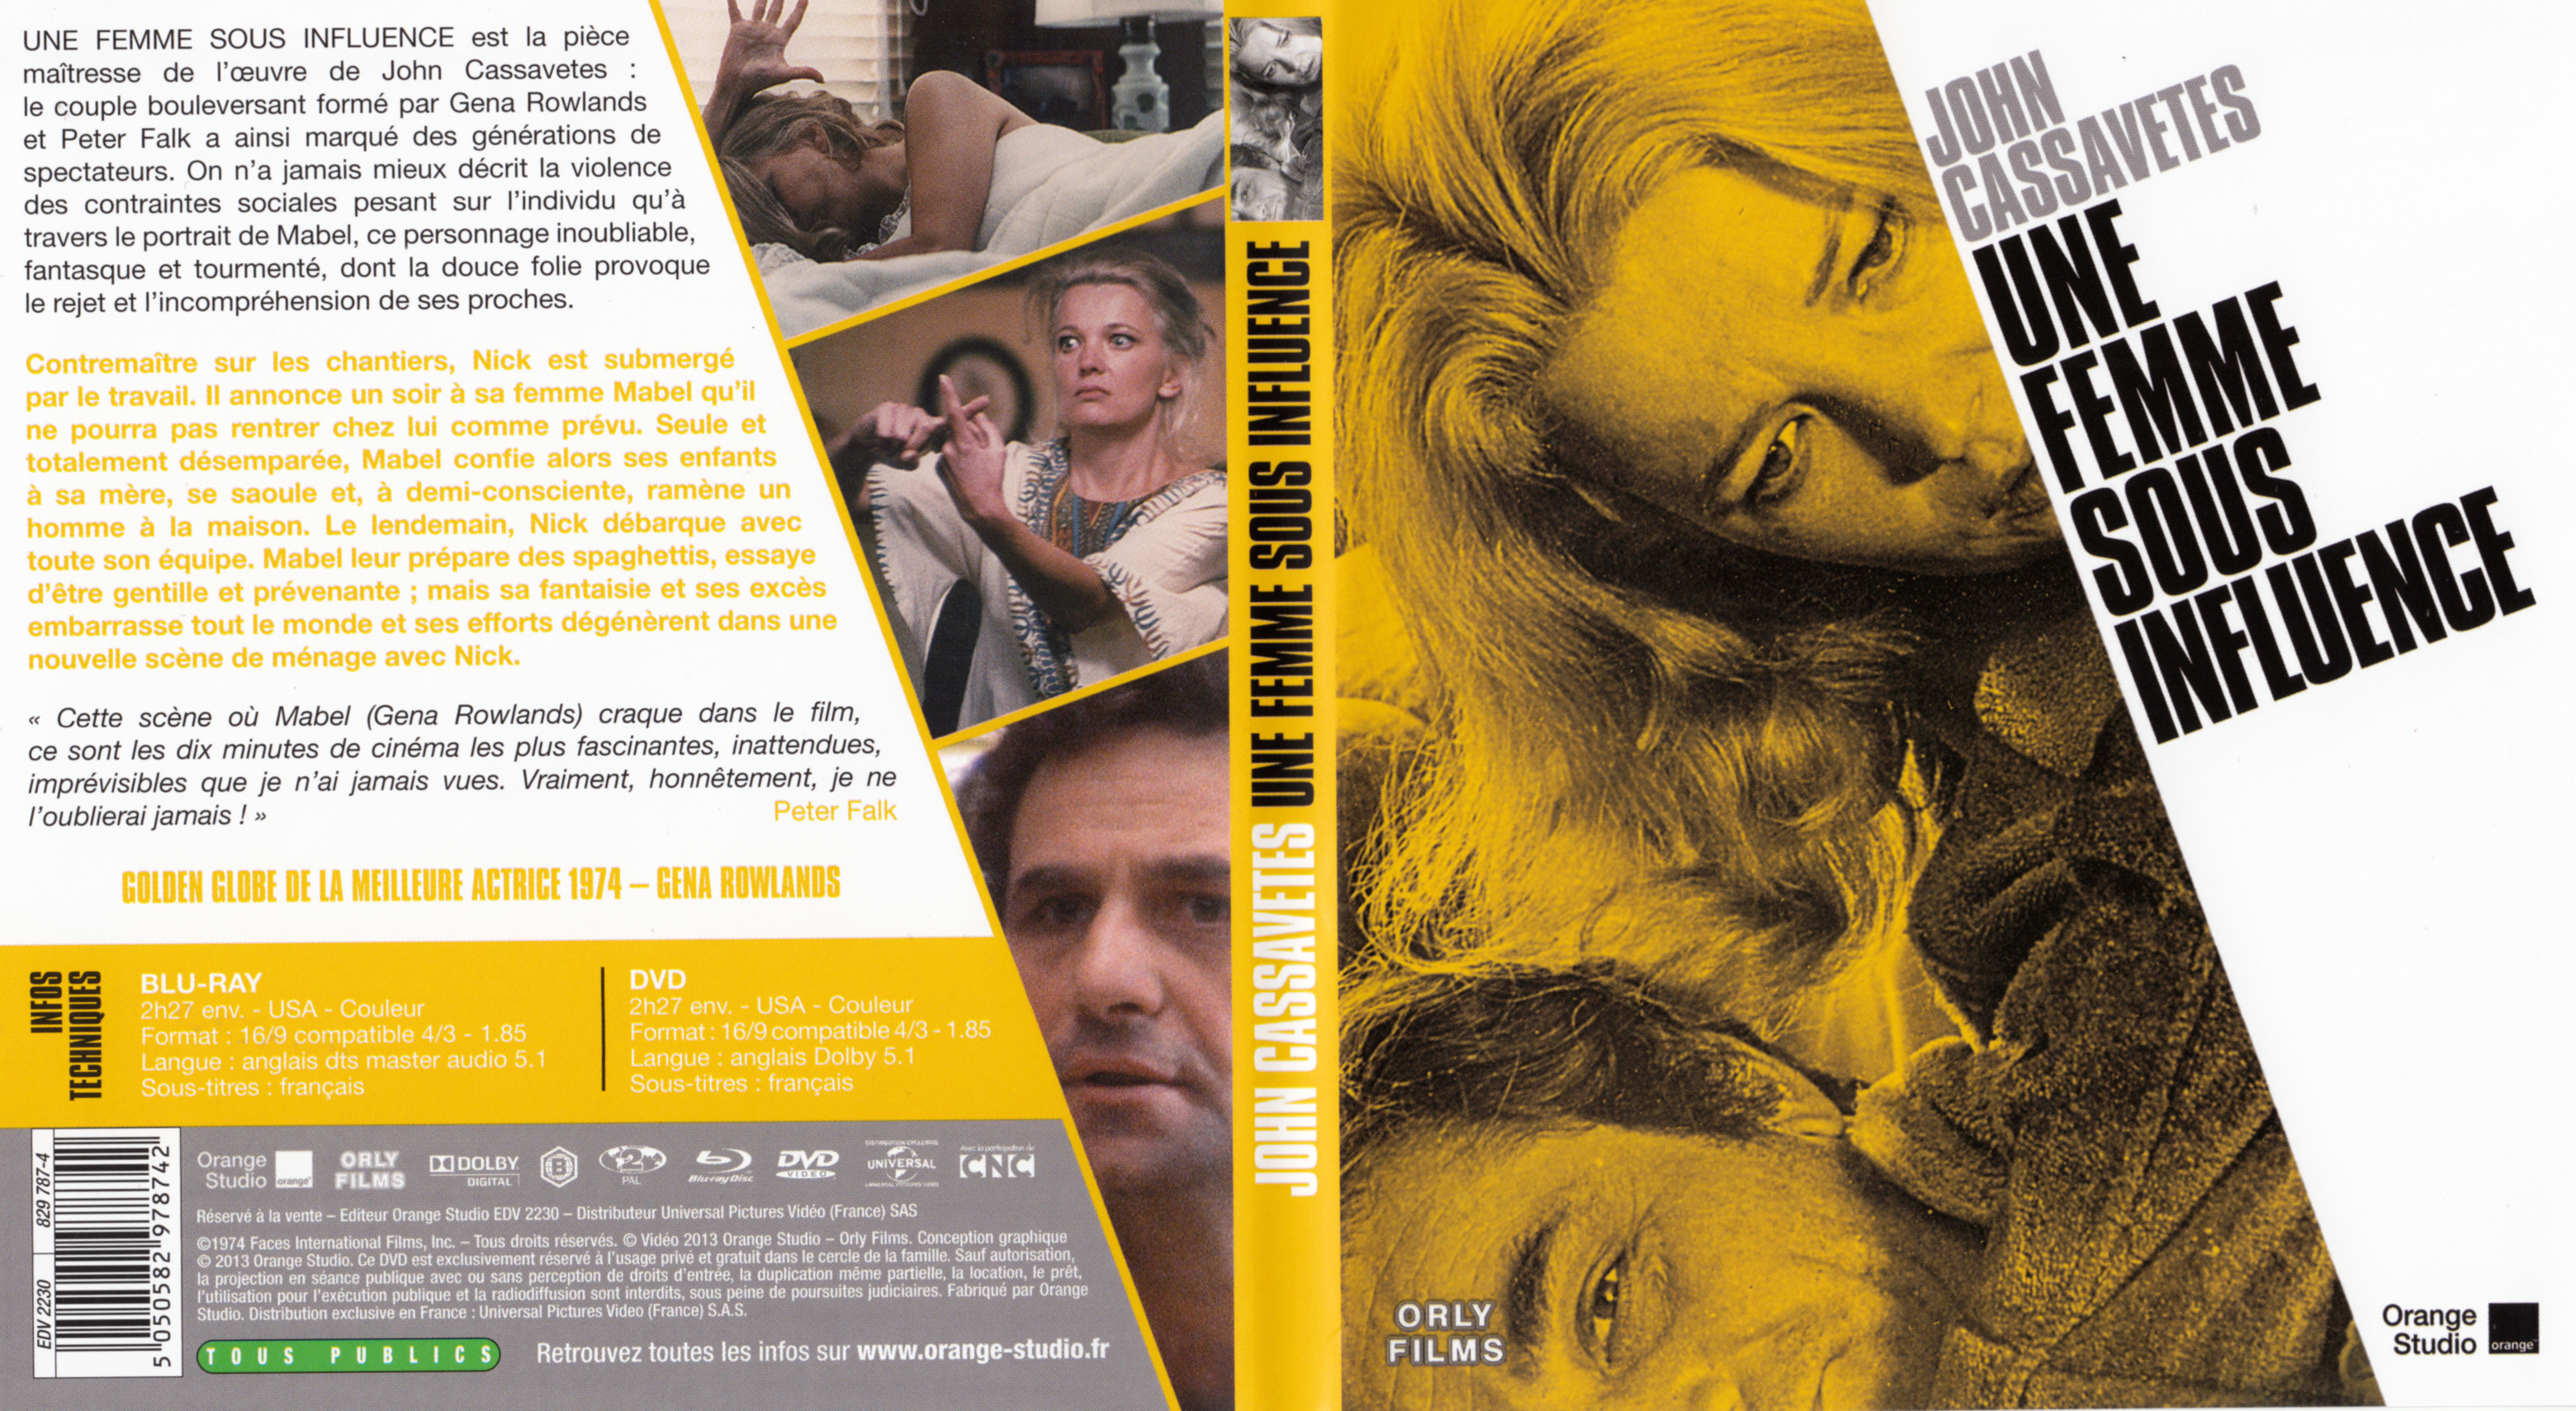 Jaquette DVD Une femme sous influence (BLU-RAY)